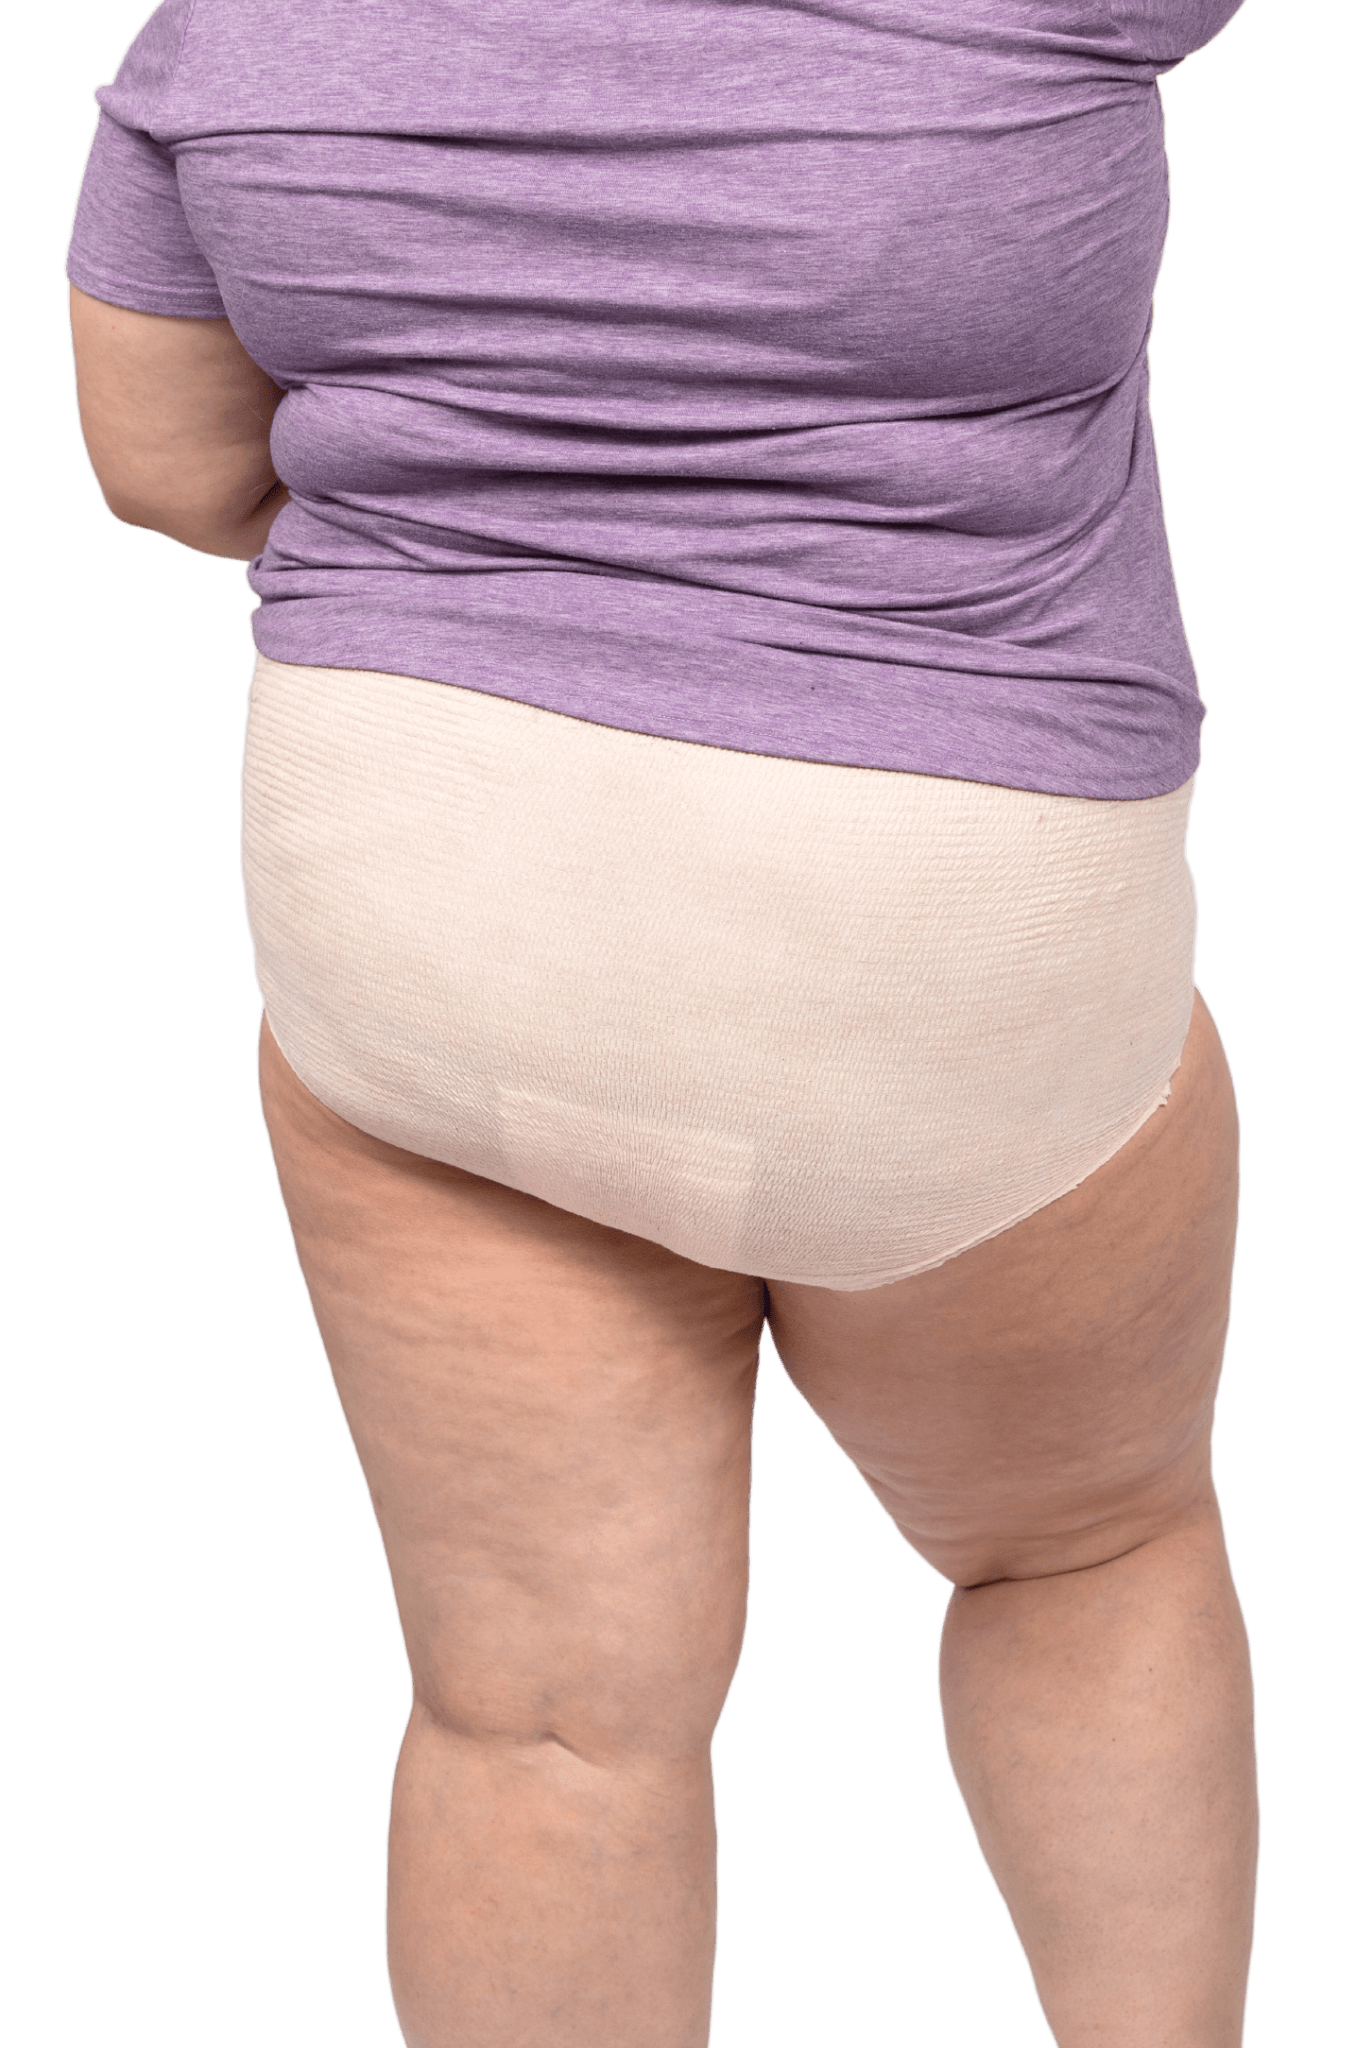 Leakproof Underwear For Women Incontinence,leak Protective Pants